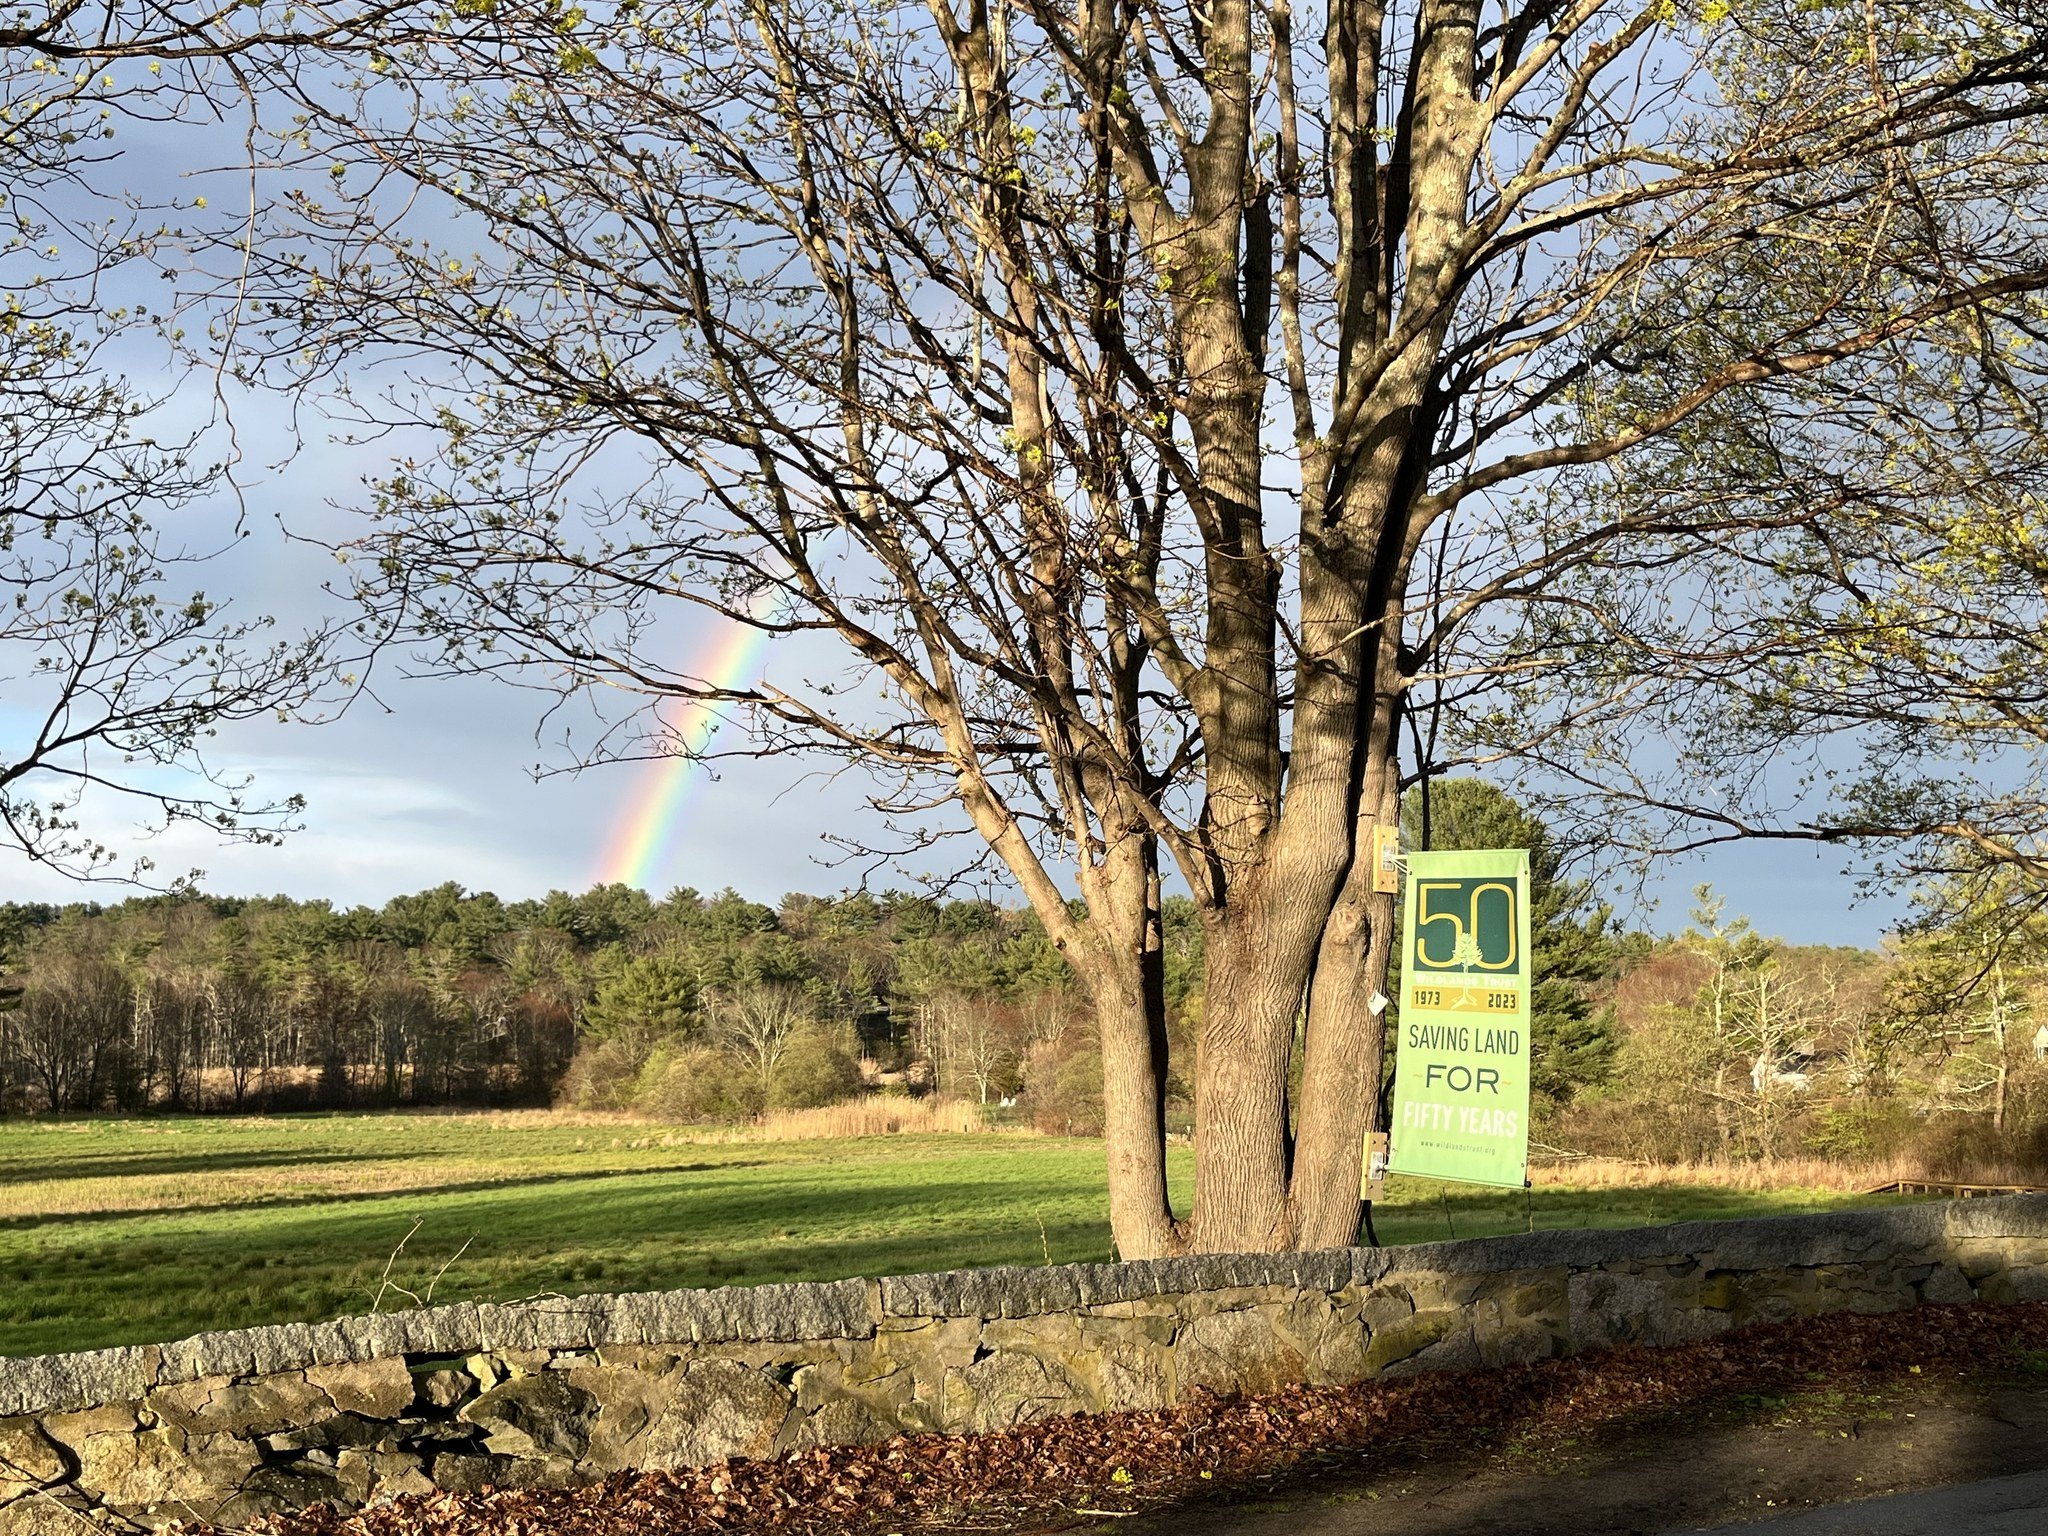 It's finally spring in Southeastern Massachusetts! Where is your favorite place to explore? 🌈

This Mother's Day, treat your mom to nature: wildlandstrust.org/trails 🌱

📸 Sylvester Field in Hanover. Photo by Elizabeth Johansen.